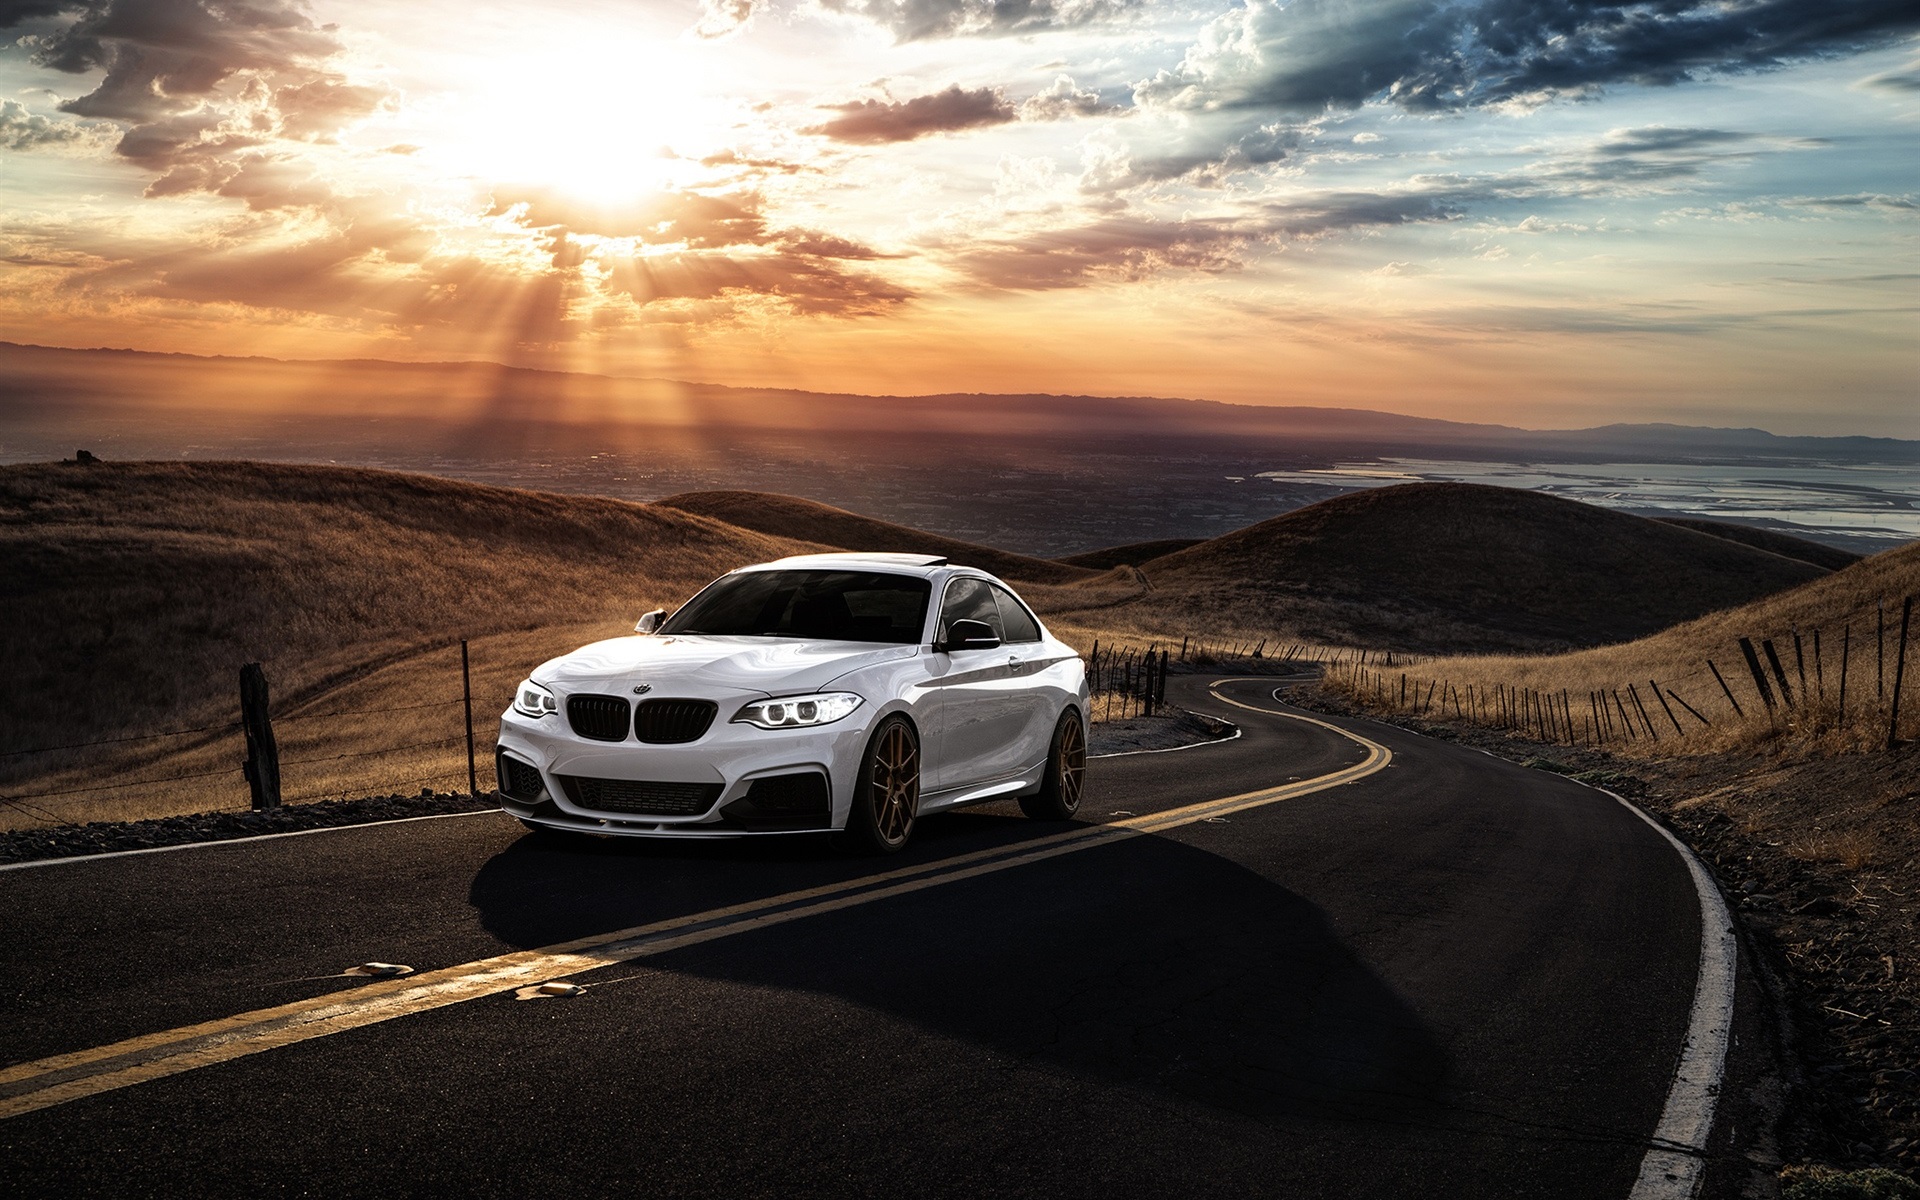 Bmw M235i White Car Sunset Clouds Road Wallpaper Cars Wallpaper Better